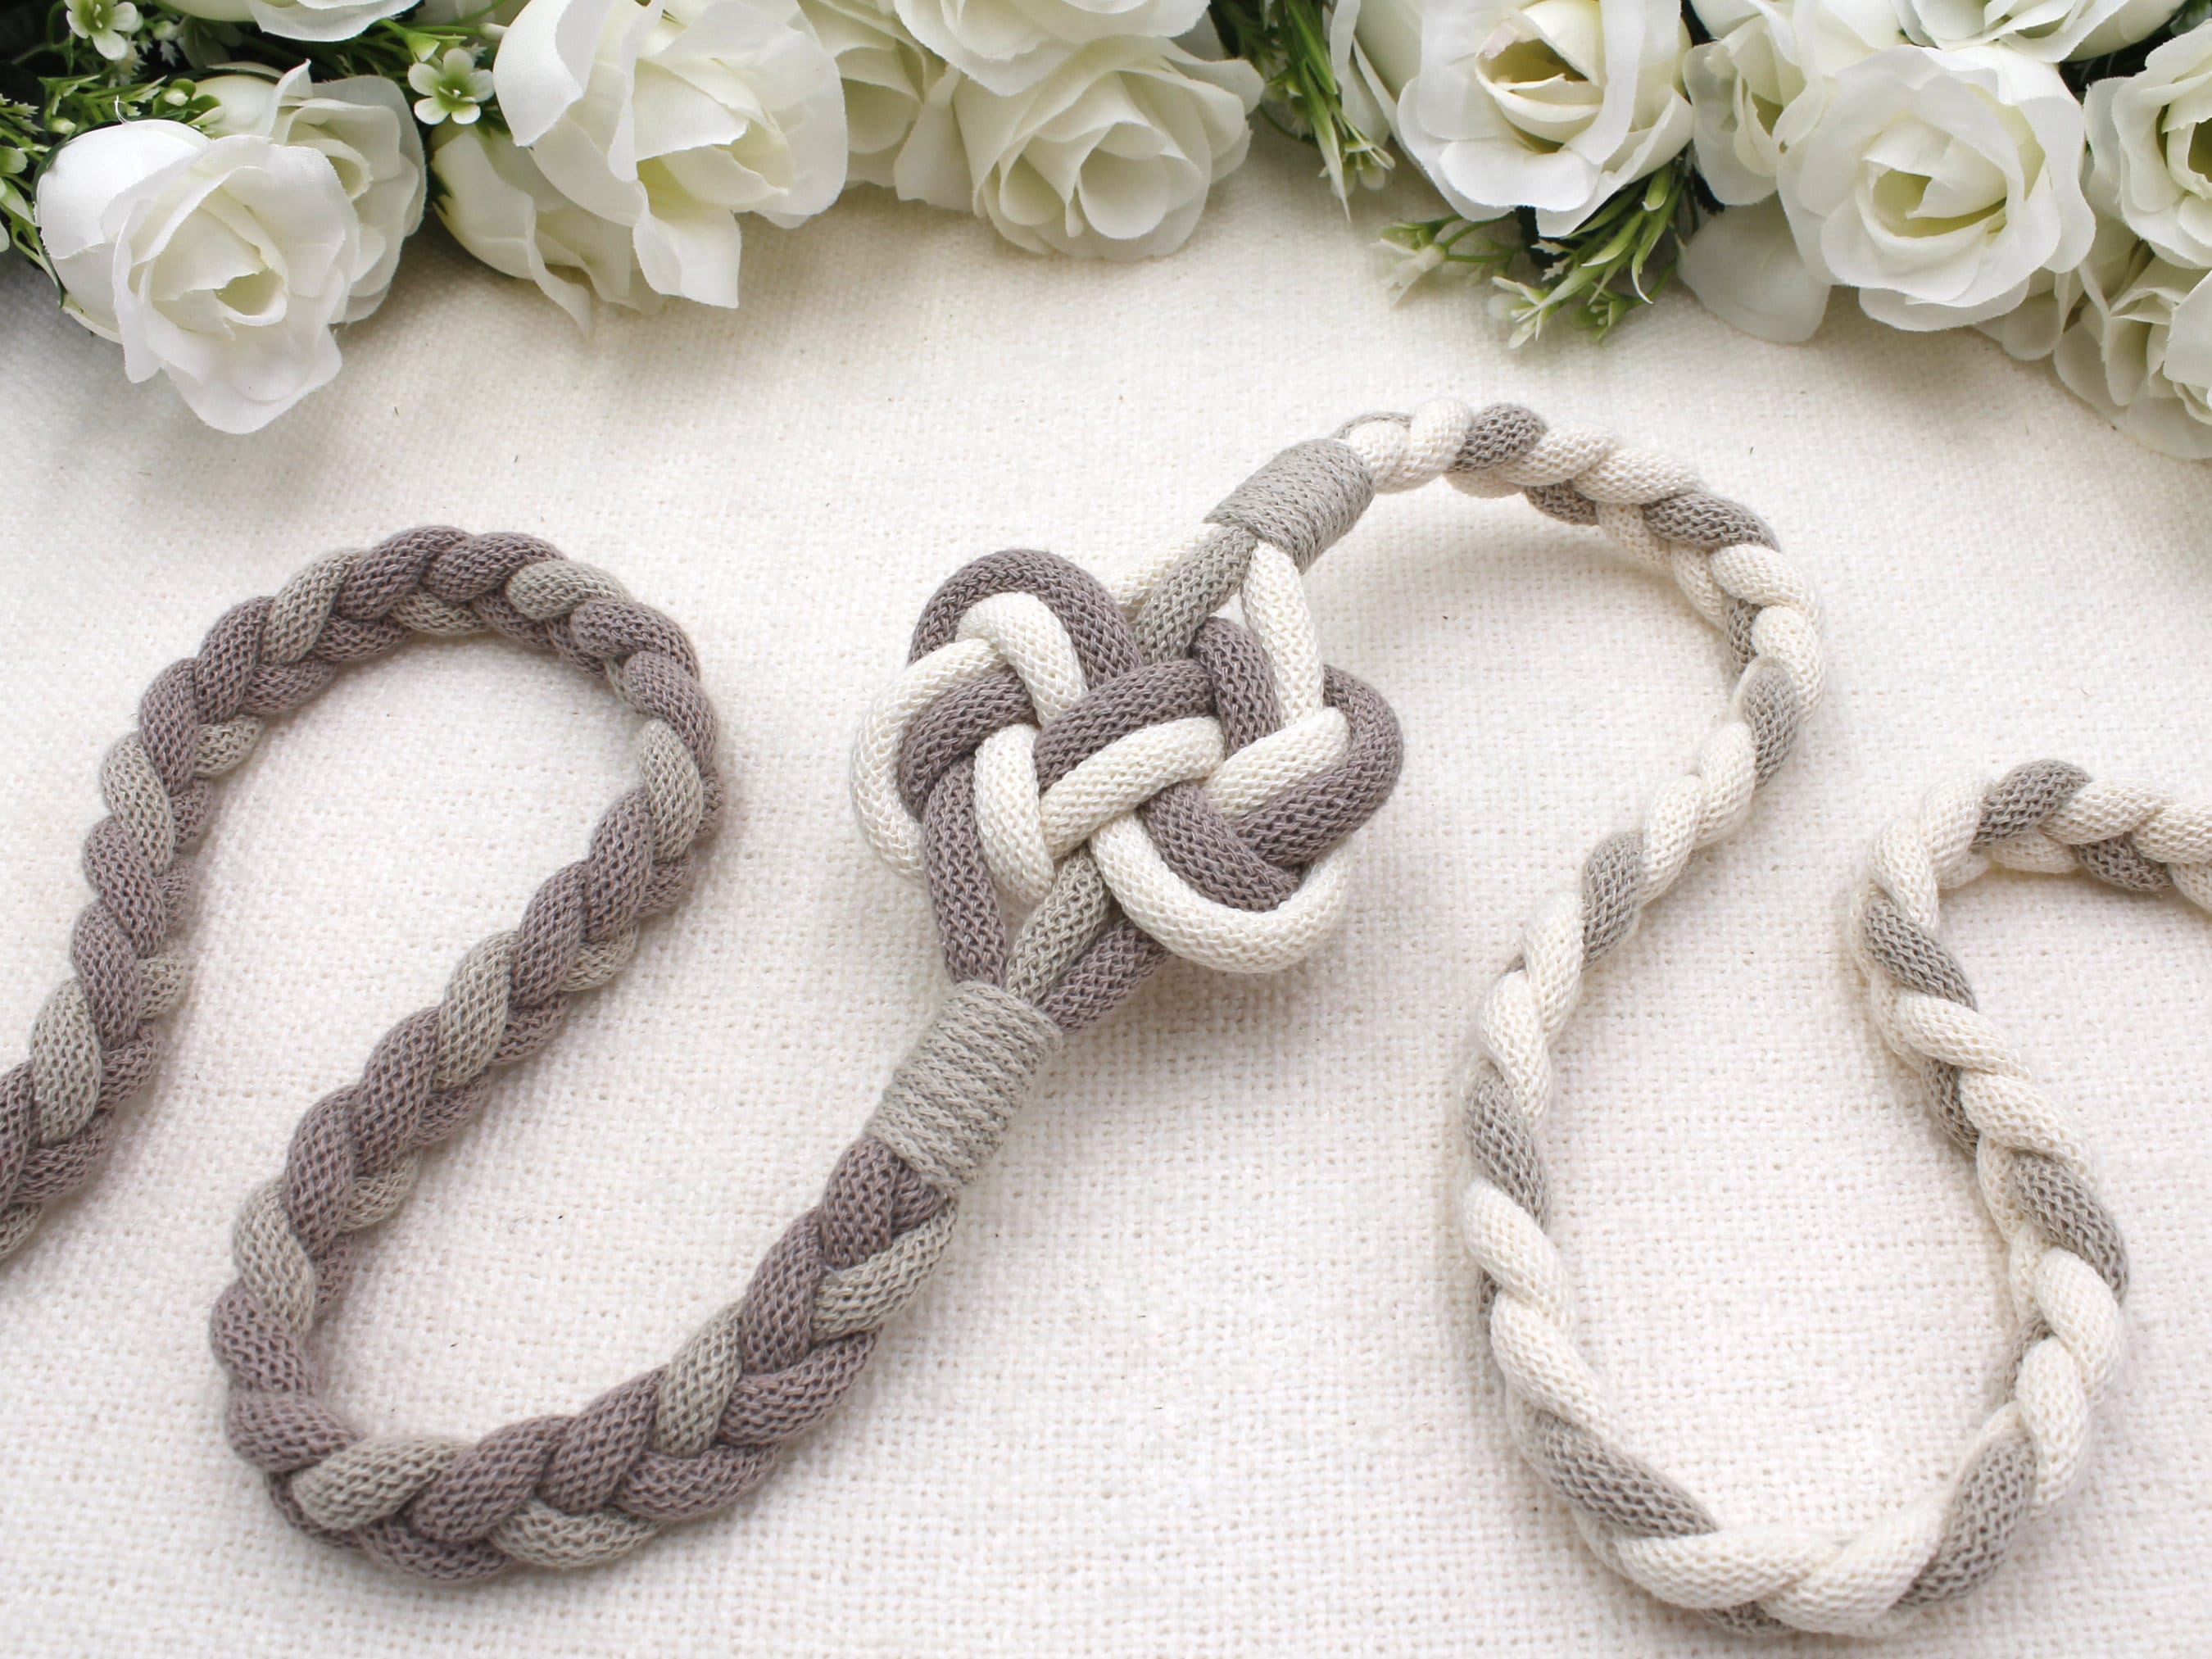 Custom Trinity Braid Handfasting Cord in Your Colors Option to